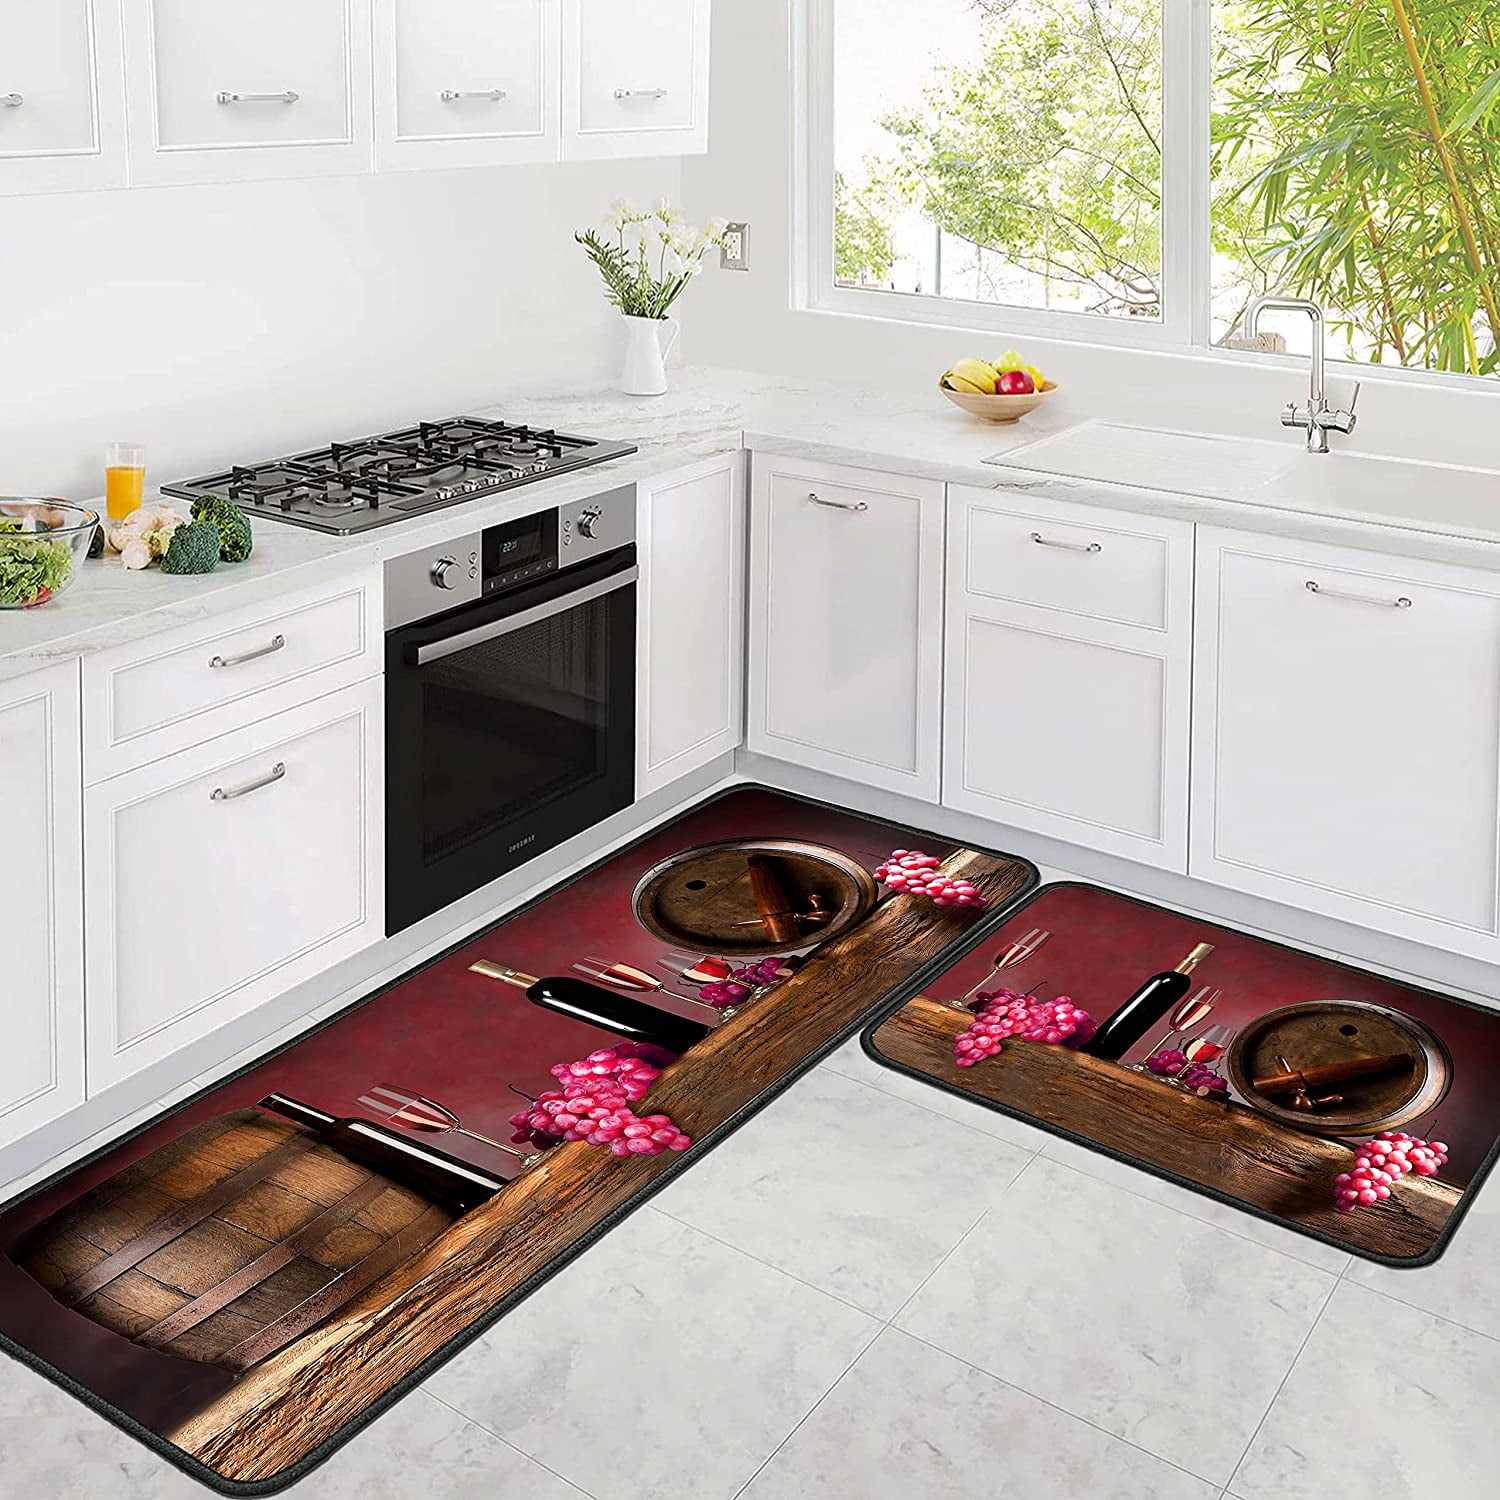 COSY HOMEER Soft Kitchen Rugs [2 PCS] for in Front of Sink Super